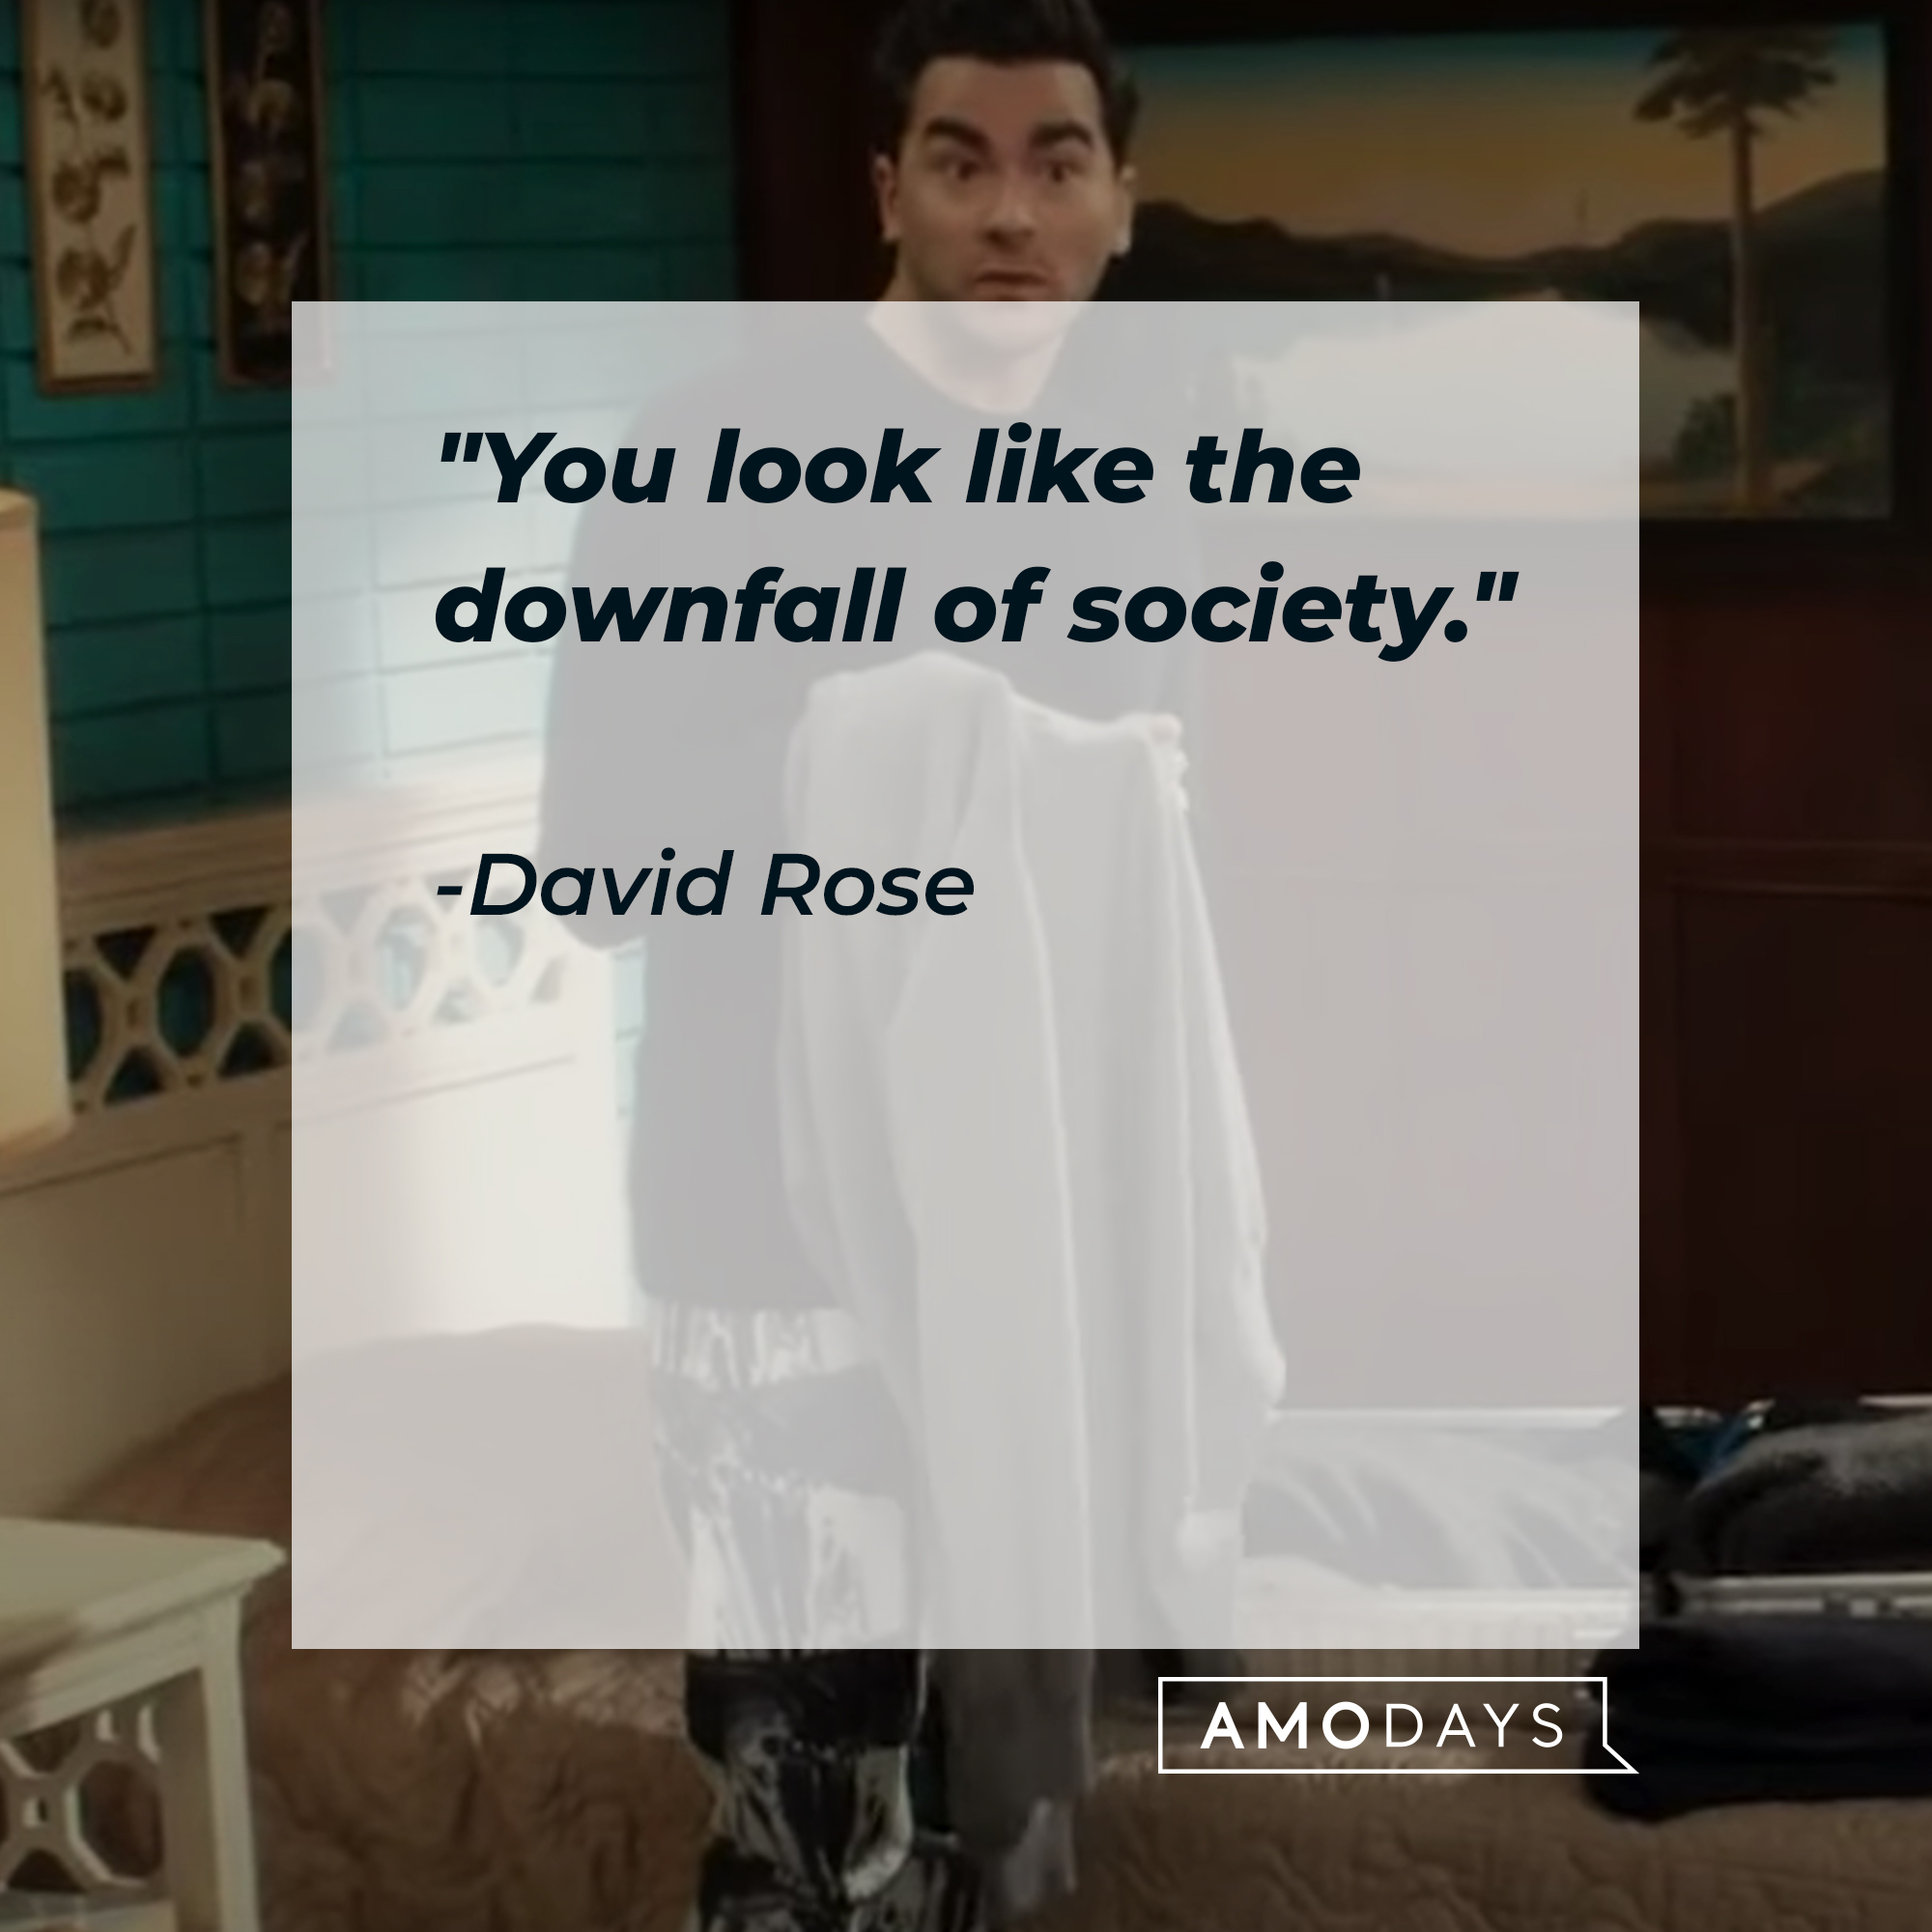 A photo of David Rose with the quote, "You look like the downfall of society." | Source: YouTube/PopTVVideo